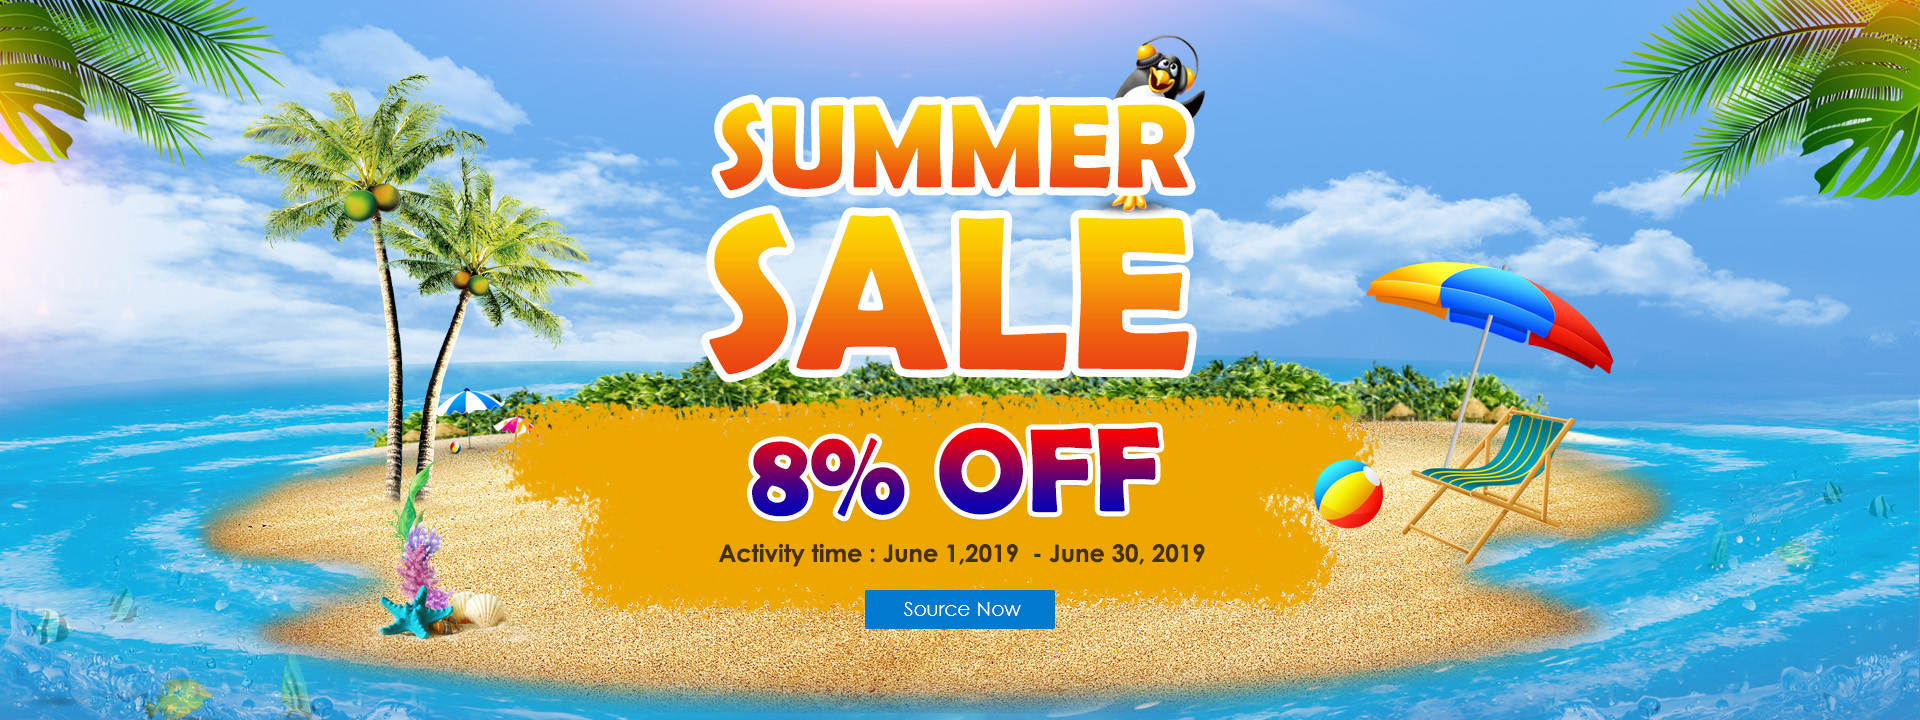 2019 The Summer Promotion